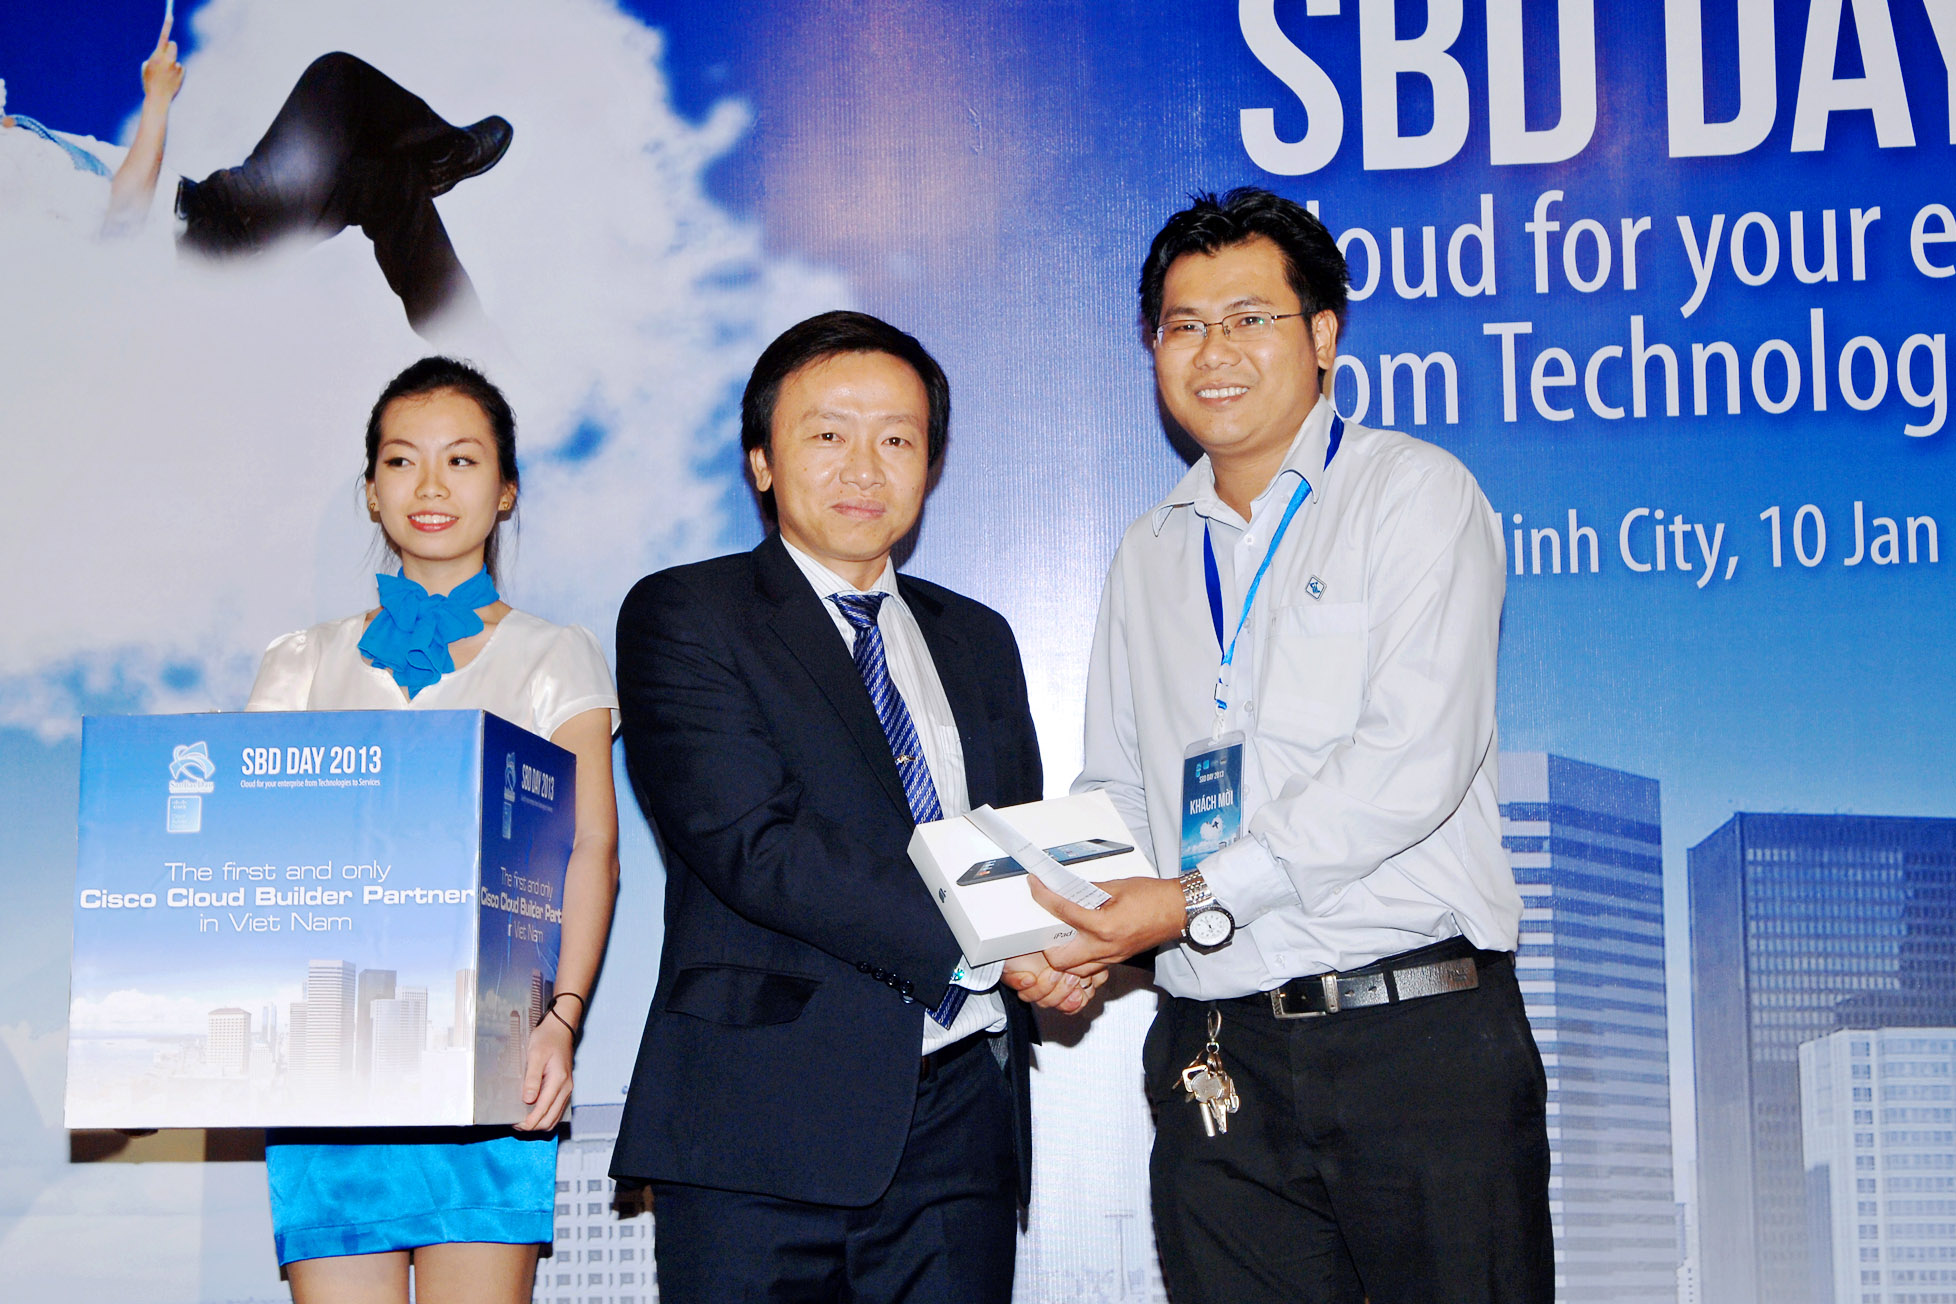 Sao Bac Dau organized the SBD Day 2013 with theme : Cloud for your enterprise from technologies to services